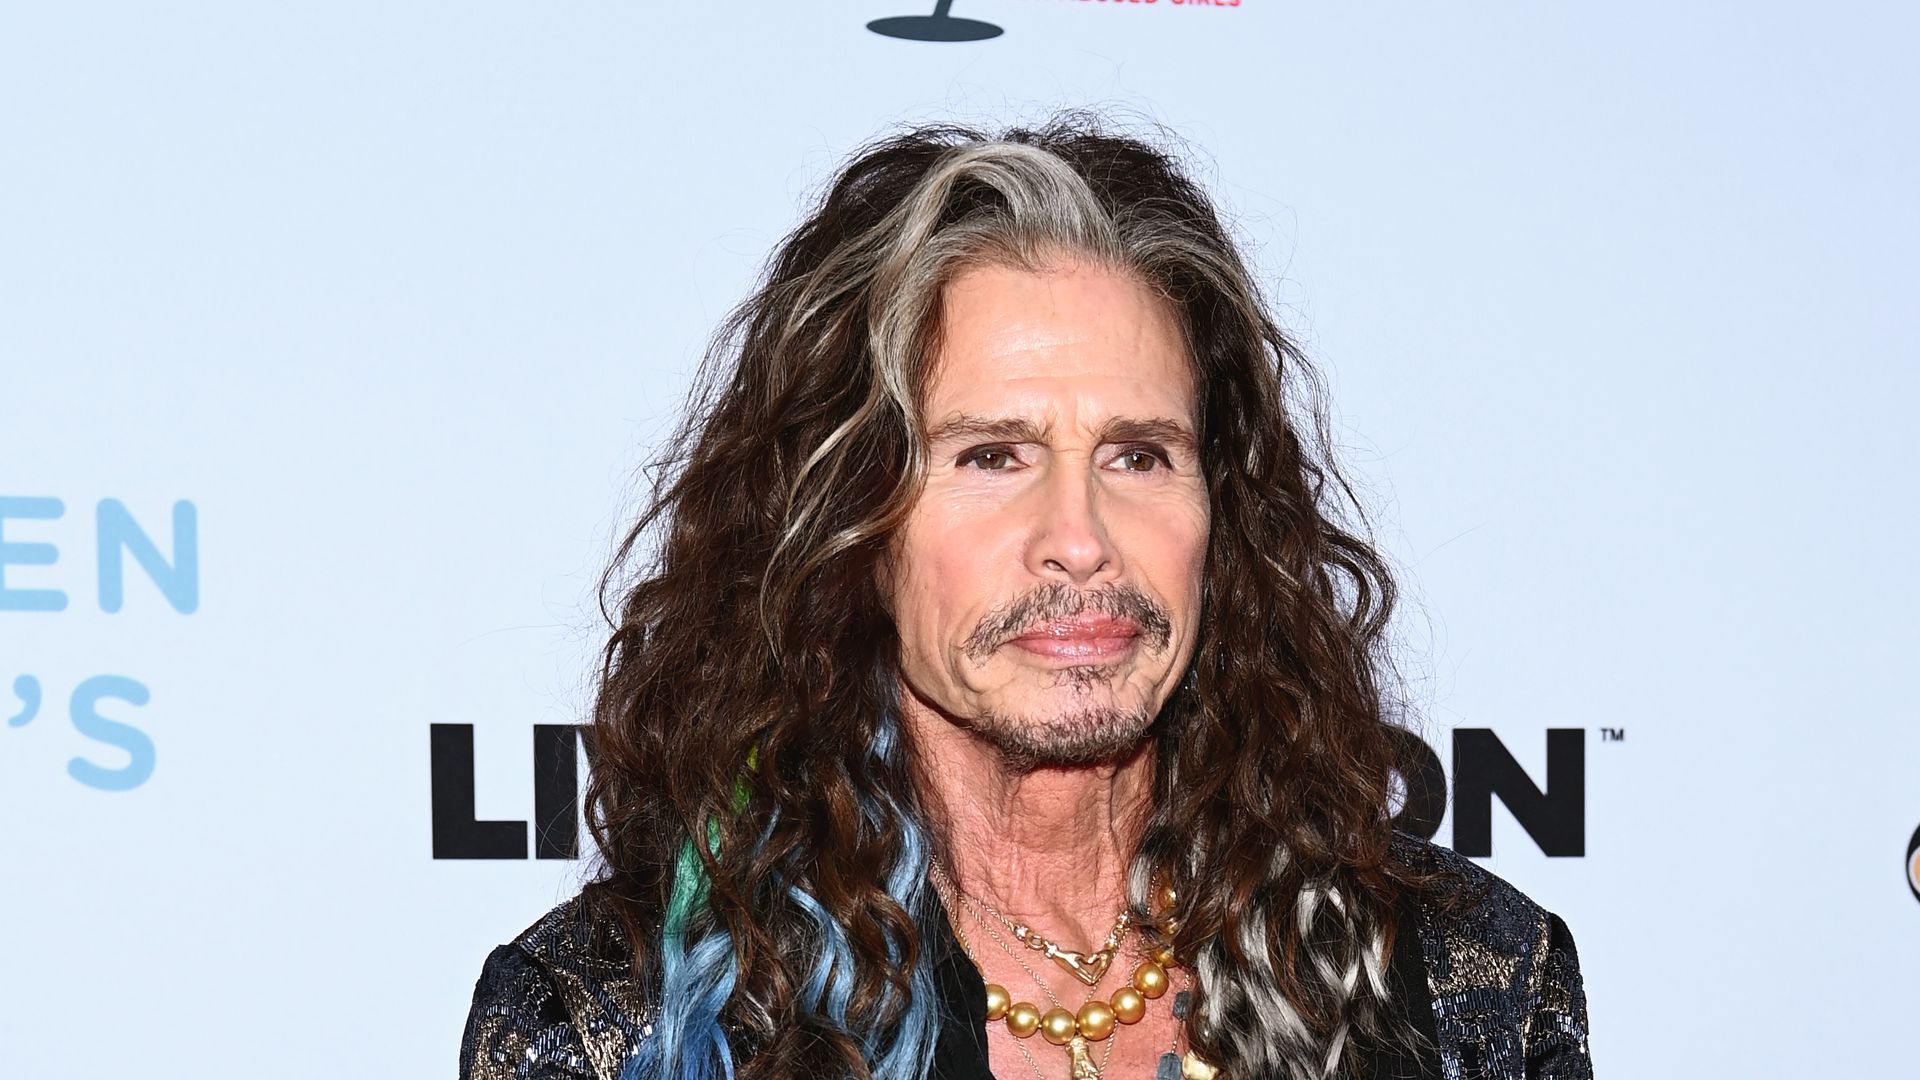 Steven Tyler attends the Jam for Janie GRAMMY Awards Viewing Party presented by Live Nation at Hollywood Palladium on February 04, 2024 in Los Angeles, California.